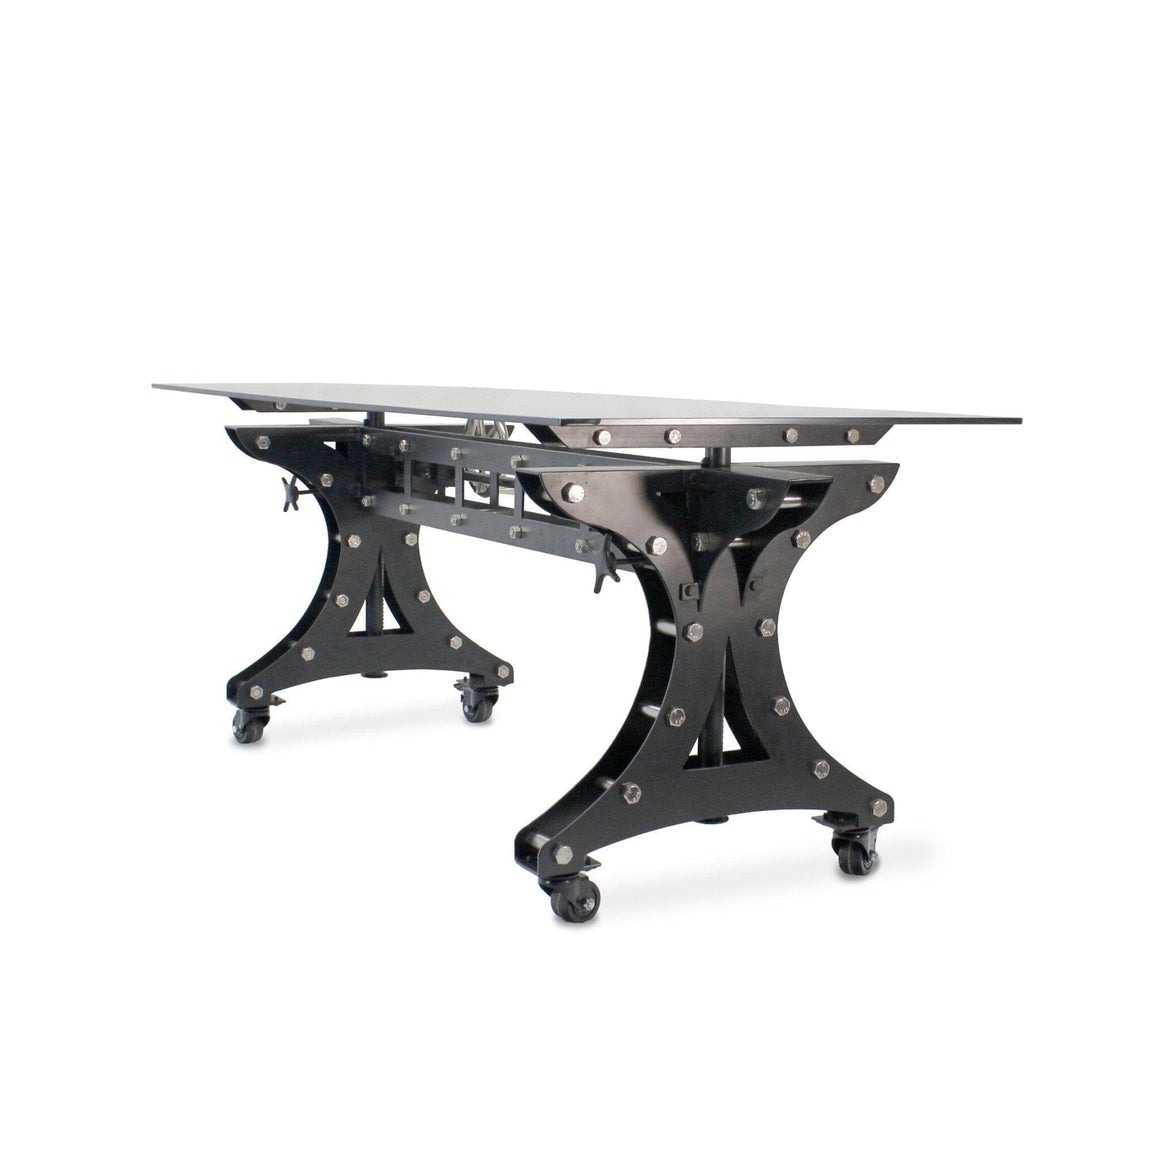 Longeron Dining Table Desk - Adjustable Height - Nickel - Casters - Glass Top - Rustic Deco Incorporated